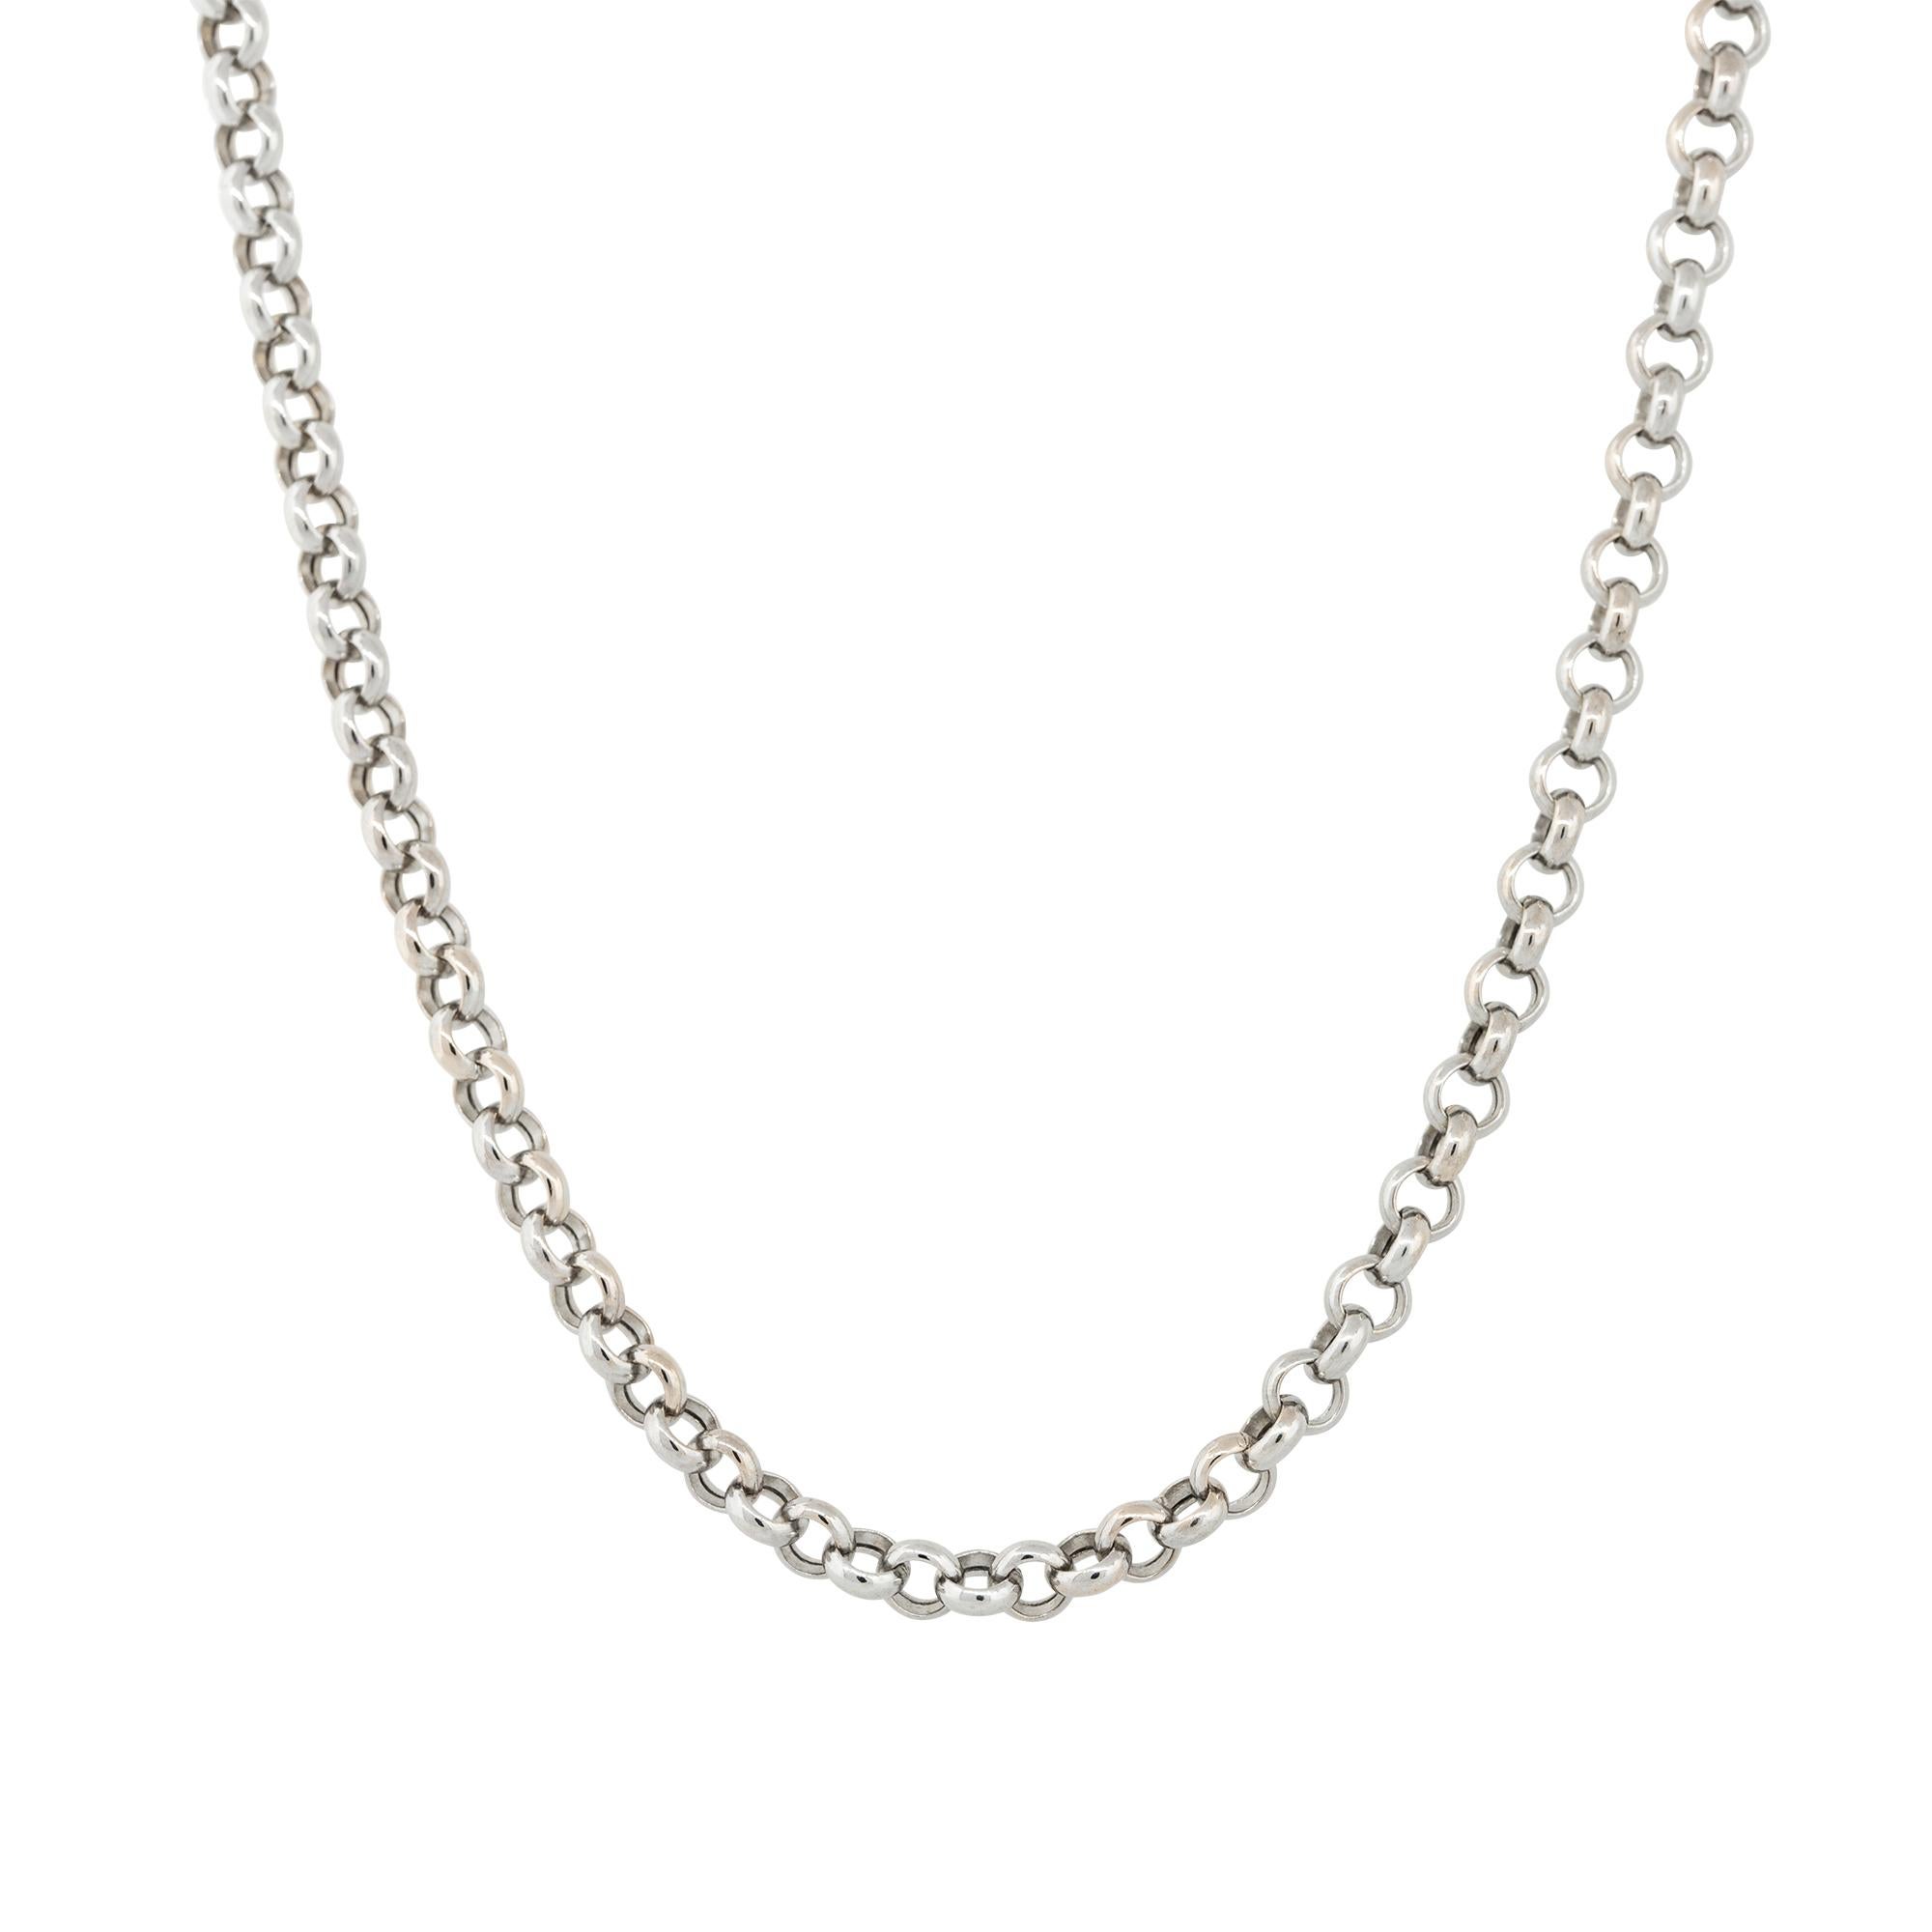 14k White Gold 19″ Men's 6mm Round Rolo Link Chain

Material: 14k White Gold
Measurements: Necklace Measures 19″ in Length and 6mm in Thickness
Fastening: Spring Ring Clasp
Item Weight: 17.5g (11.3dwt)
Additional Details: This item comes with a